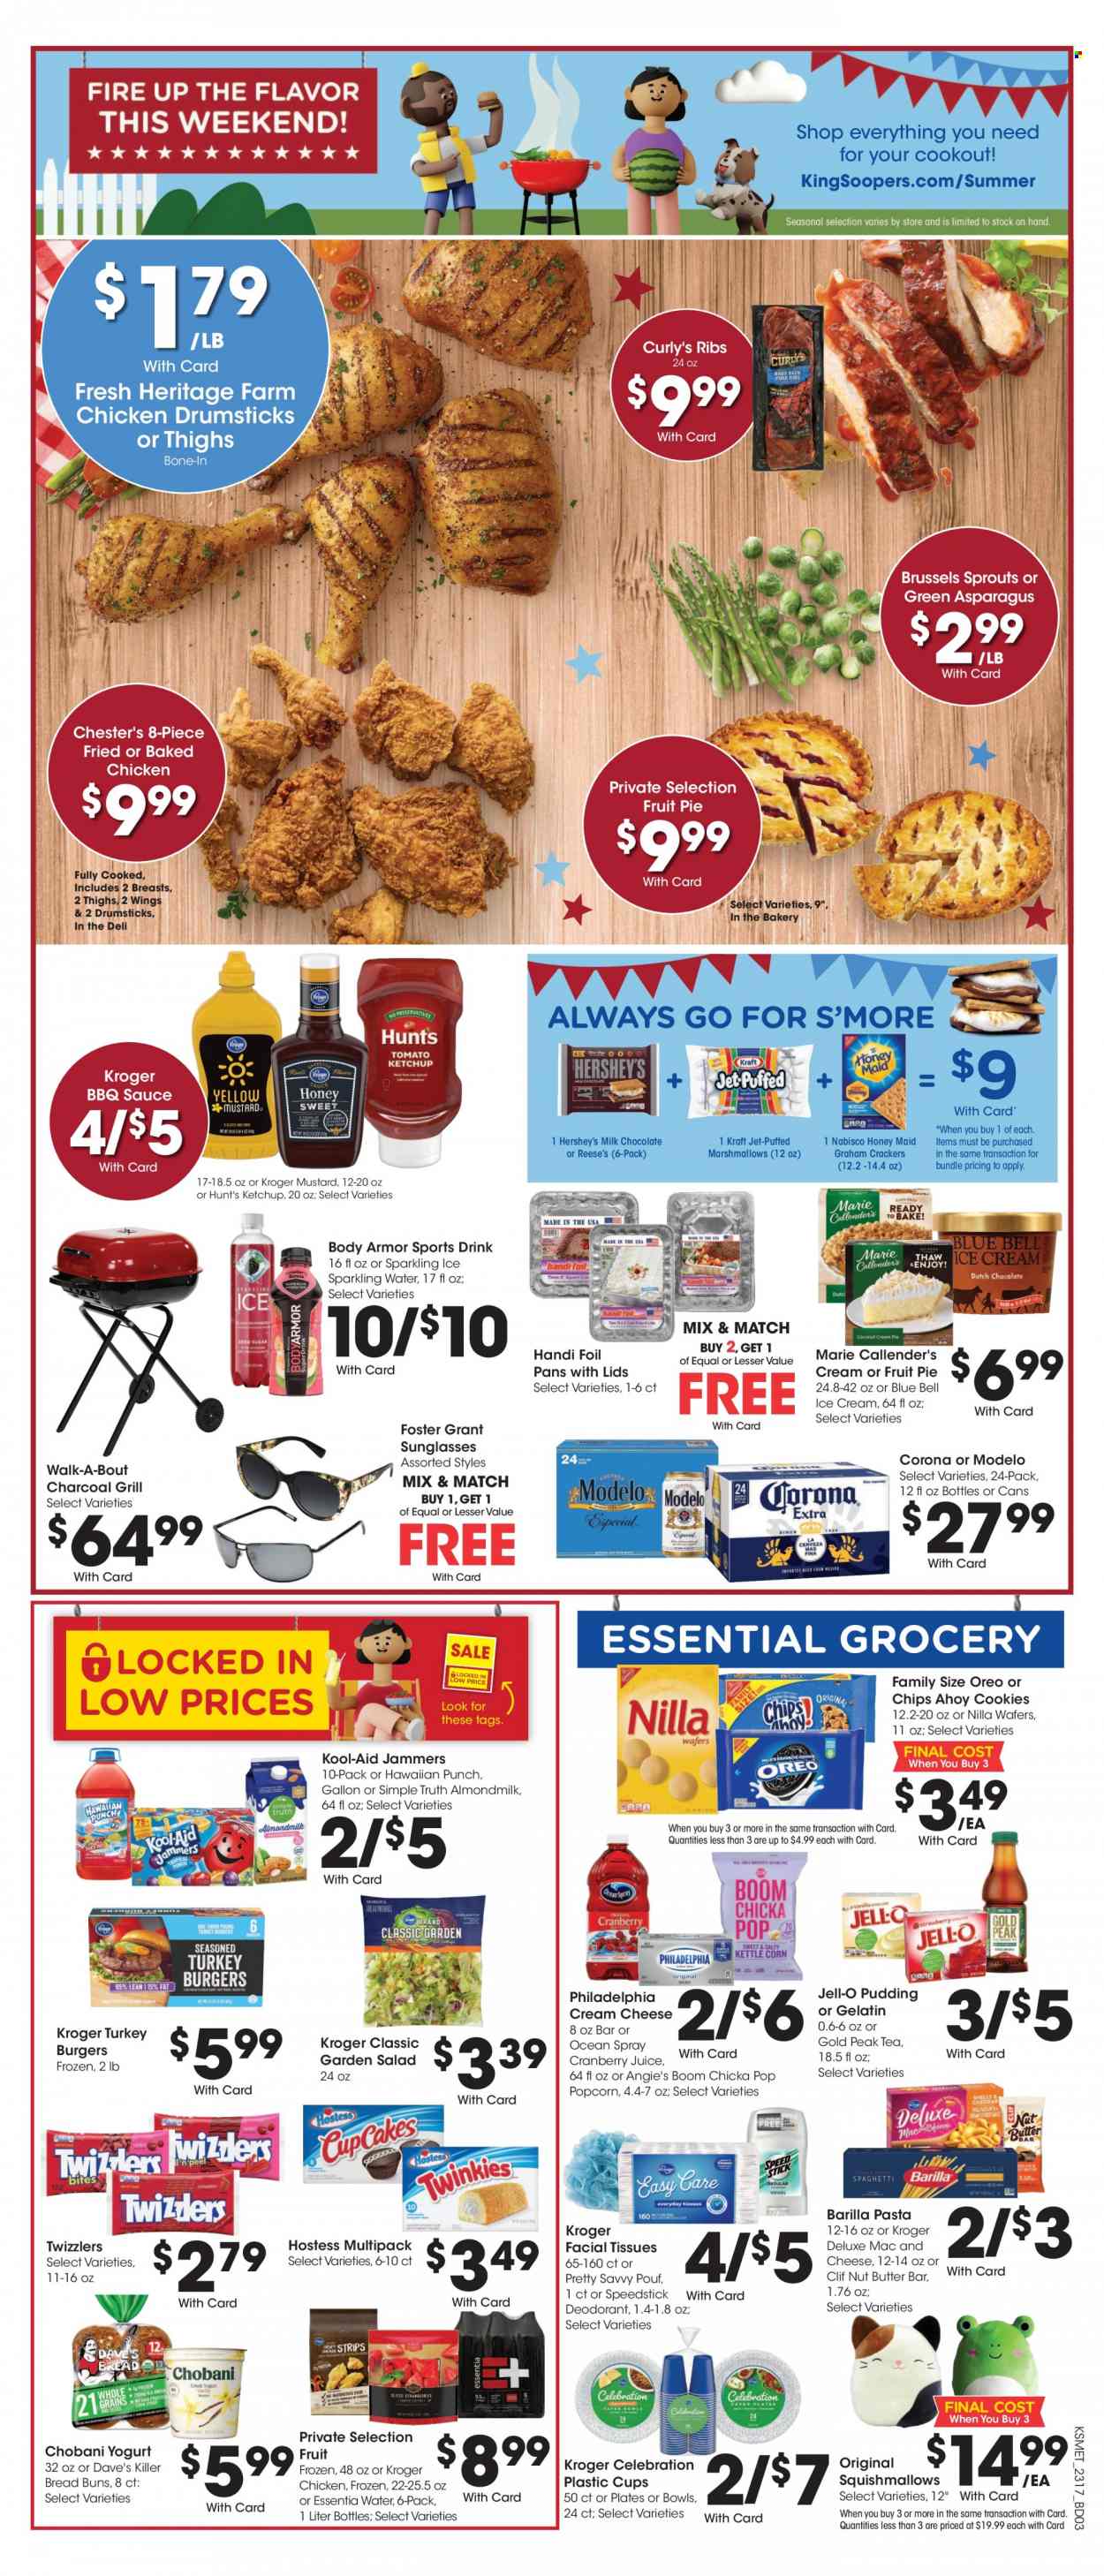 thumbnail - King Soopers Flyer - 05/24/2023 - 05/30/2023 - Sales products - bread, pie, fruit pie, asparagus, salad, brussel sprouts, macaroni & cheese, hamburger, pasta, sauce, fried chicken, Barilla, Marie Callender's, Kraft®, ready meal, cream cheese, Philadelphia, pudding, Chobani, almond milk, ice cream, Reese's, Hershey's, Blue Bell, cookies, graham crackers, marshmallows, milk chocolate, wafers, Celebration, crackers, Nabisco, popcorn, Jell-O, Honey Maid, BBQ sauce, mustard, ketchup, cranberry juice, juice, Body Armor, Gold Peak Tea, flavored water, sparkling water, water, tea, beer, Corona Extra, Modelo, chicken drumsticks, turkey, turkey burger, tissues, Jet, facial tissues, anti-perspirant, deodorant, plate, sunglasses, Squishmallows, grill. Page 2.